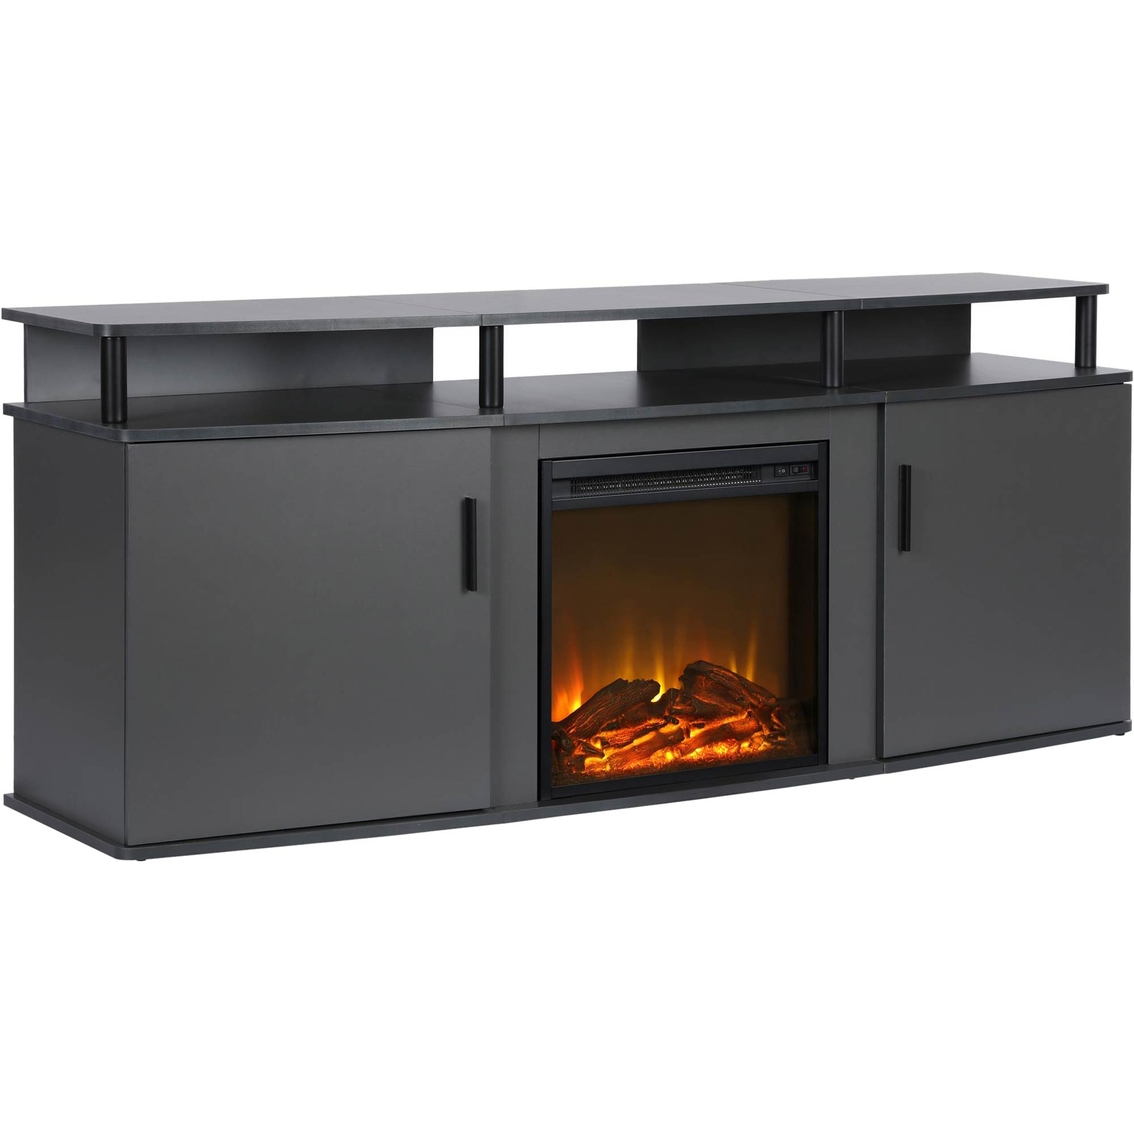 DHP Carson Electric Fireplace 70 in. TV Console - Image 1 of 4